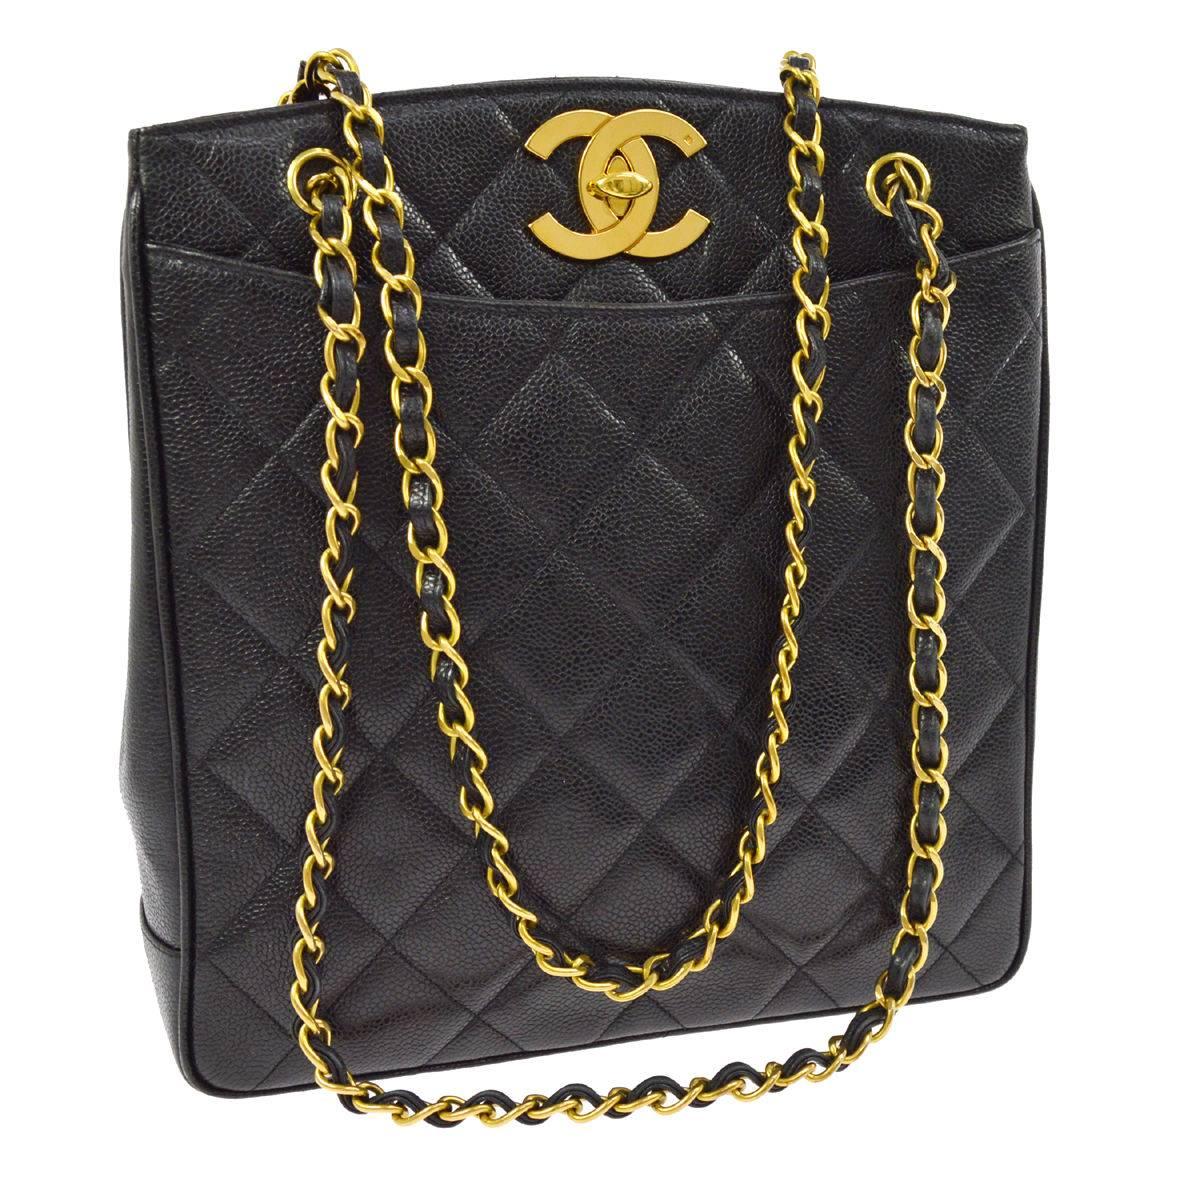 Chanel Black Caviar Leather Quilted Gold Shopper Carryall Tote Shoulder Bag